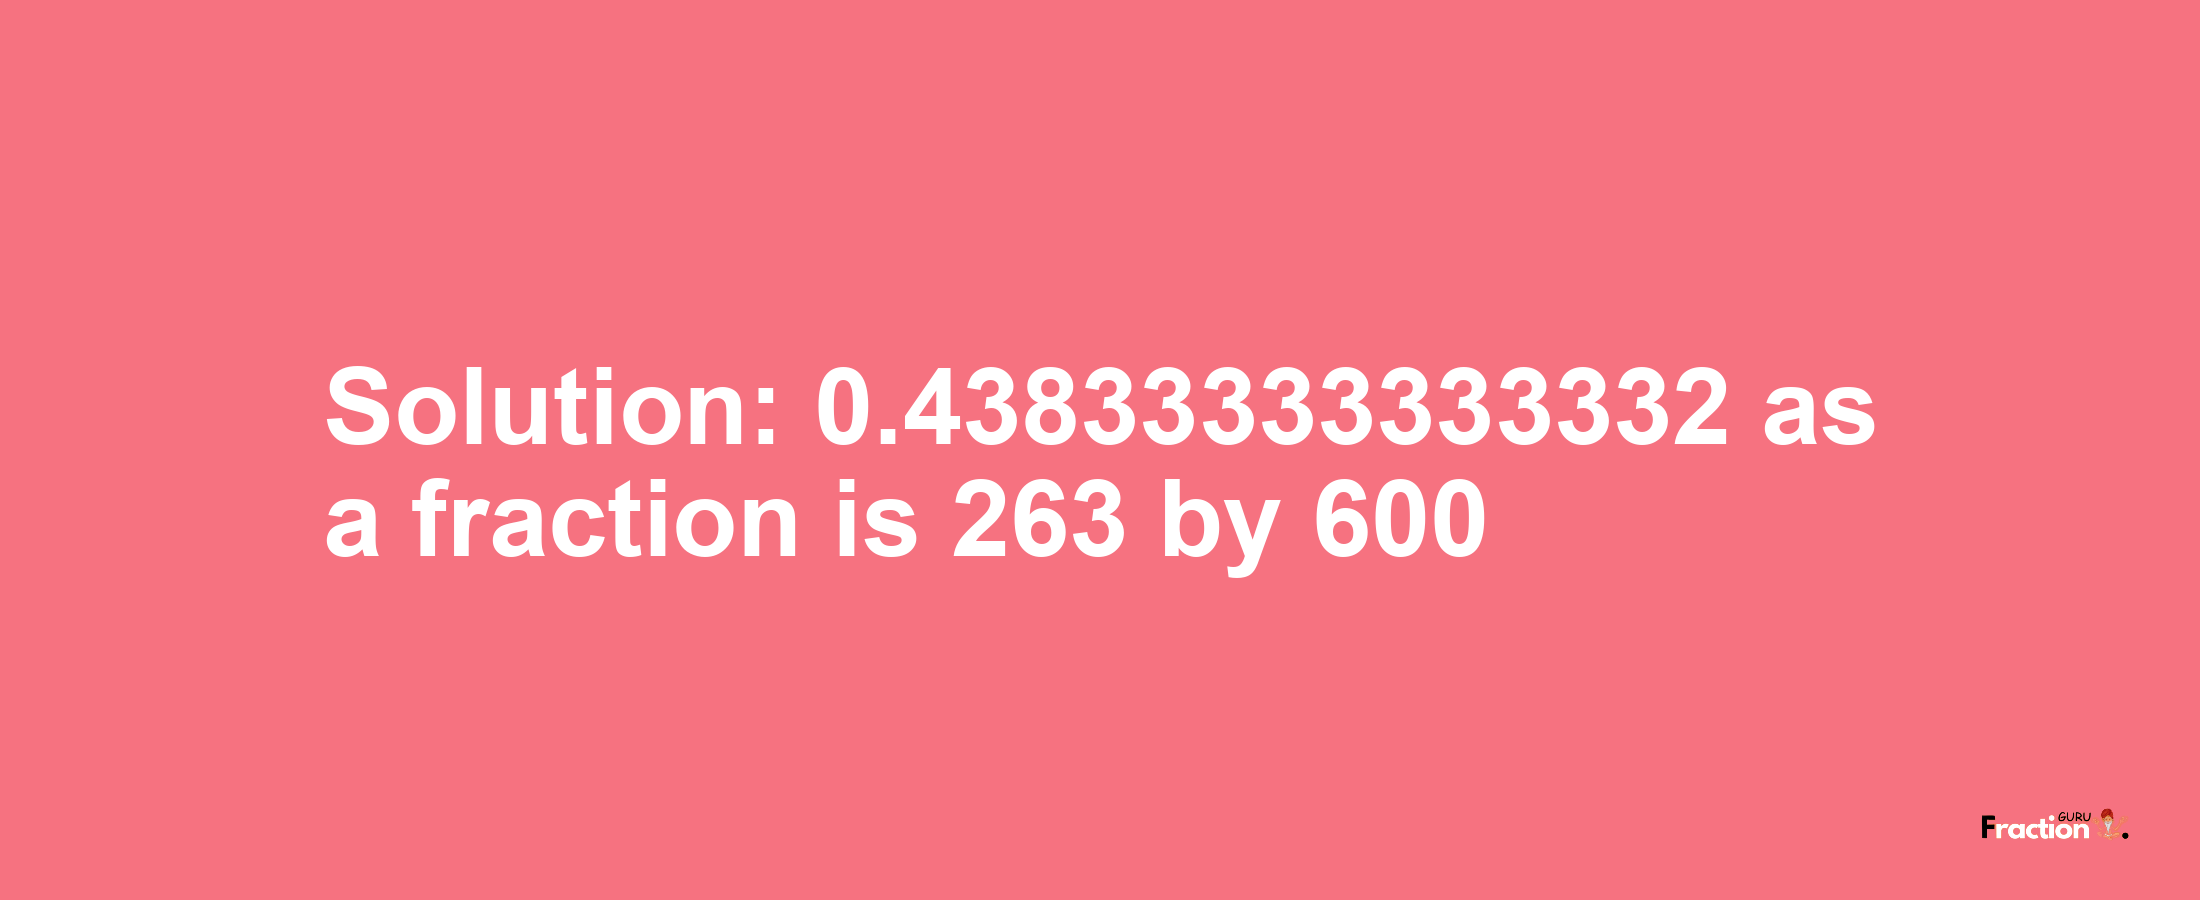 Solution:0.43833333333332 as a fraction is 263/600